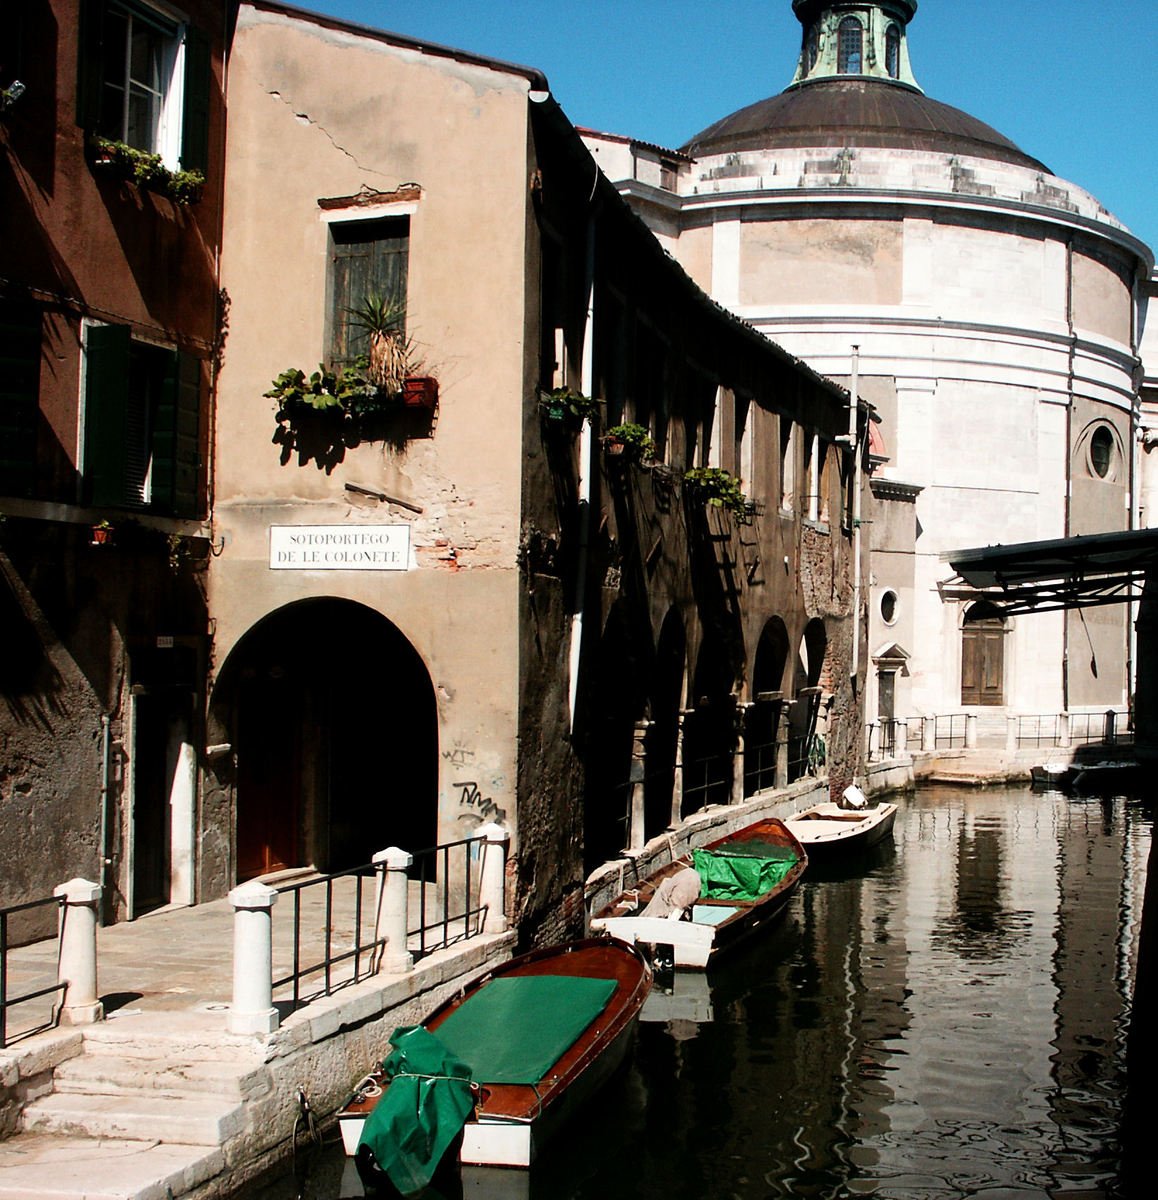 several boats are parked in the canals near buildings